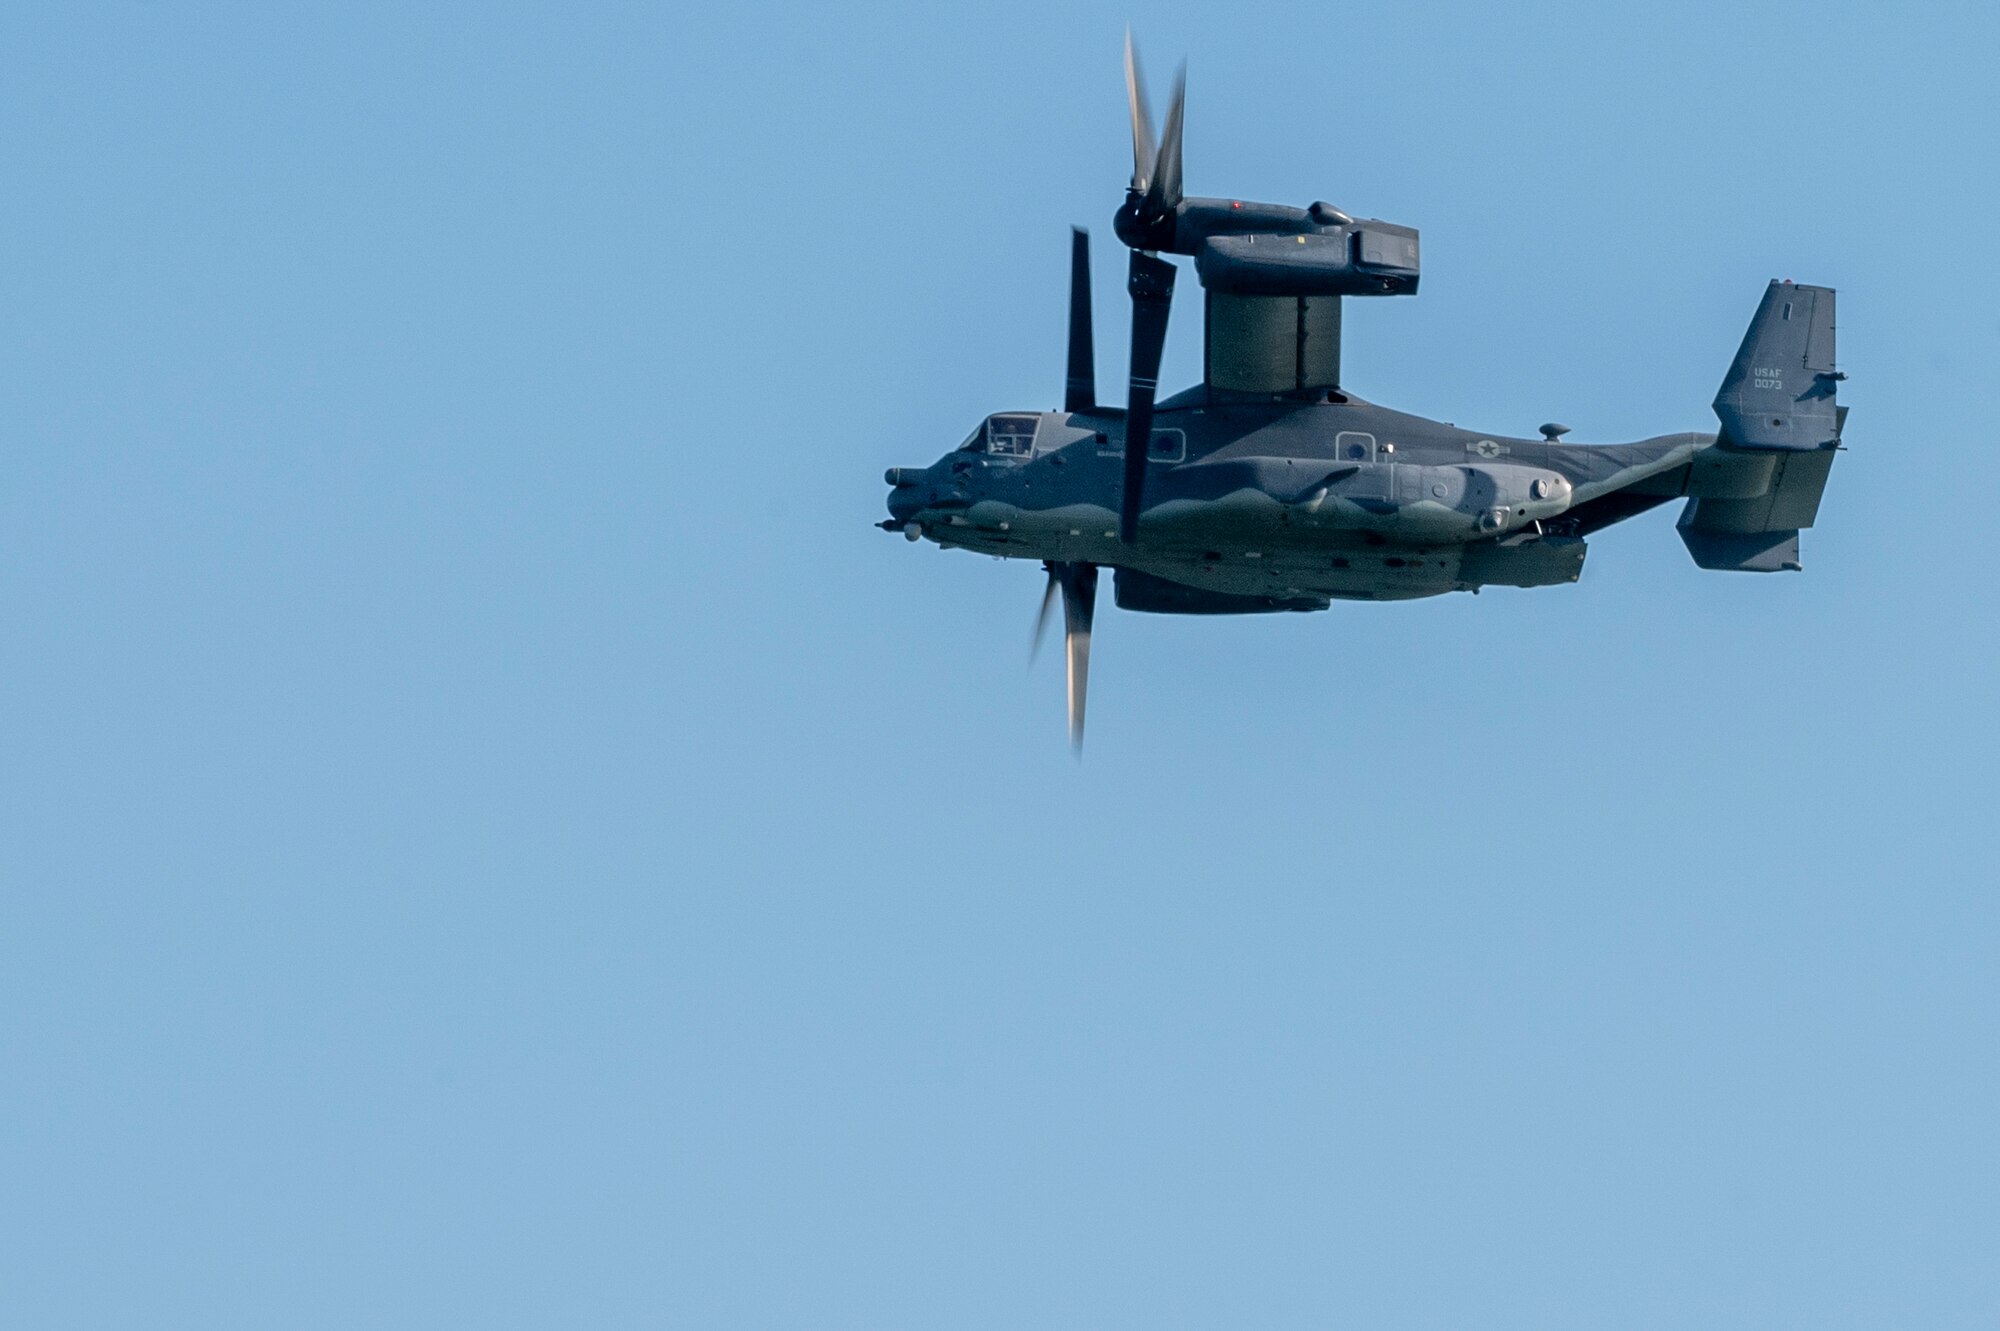 An 8th Special Operations Squadron CV-22 Osprey, assigned to Hurlburt Field, Fla., flies over during The Doolittle Raiders’ 80th Anniversary ceremony, April 18, 2022 at Okaloosa Island. U.S. Air Force Lt. Gen. Jim Slife, commander of Air Force Special Operations Command and U.S. Air Force Lt. Gen. Brad Webb, commander of Air Education and Training Command (AETC), conducted an aerial review in honor of the members of the Doolittle Raiders.